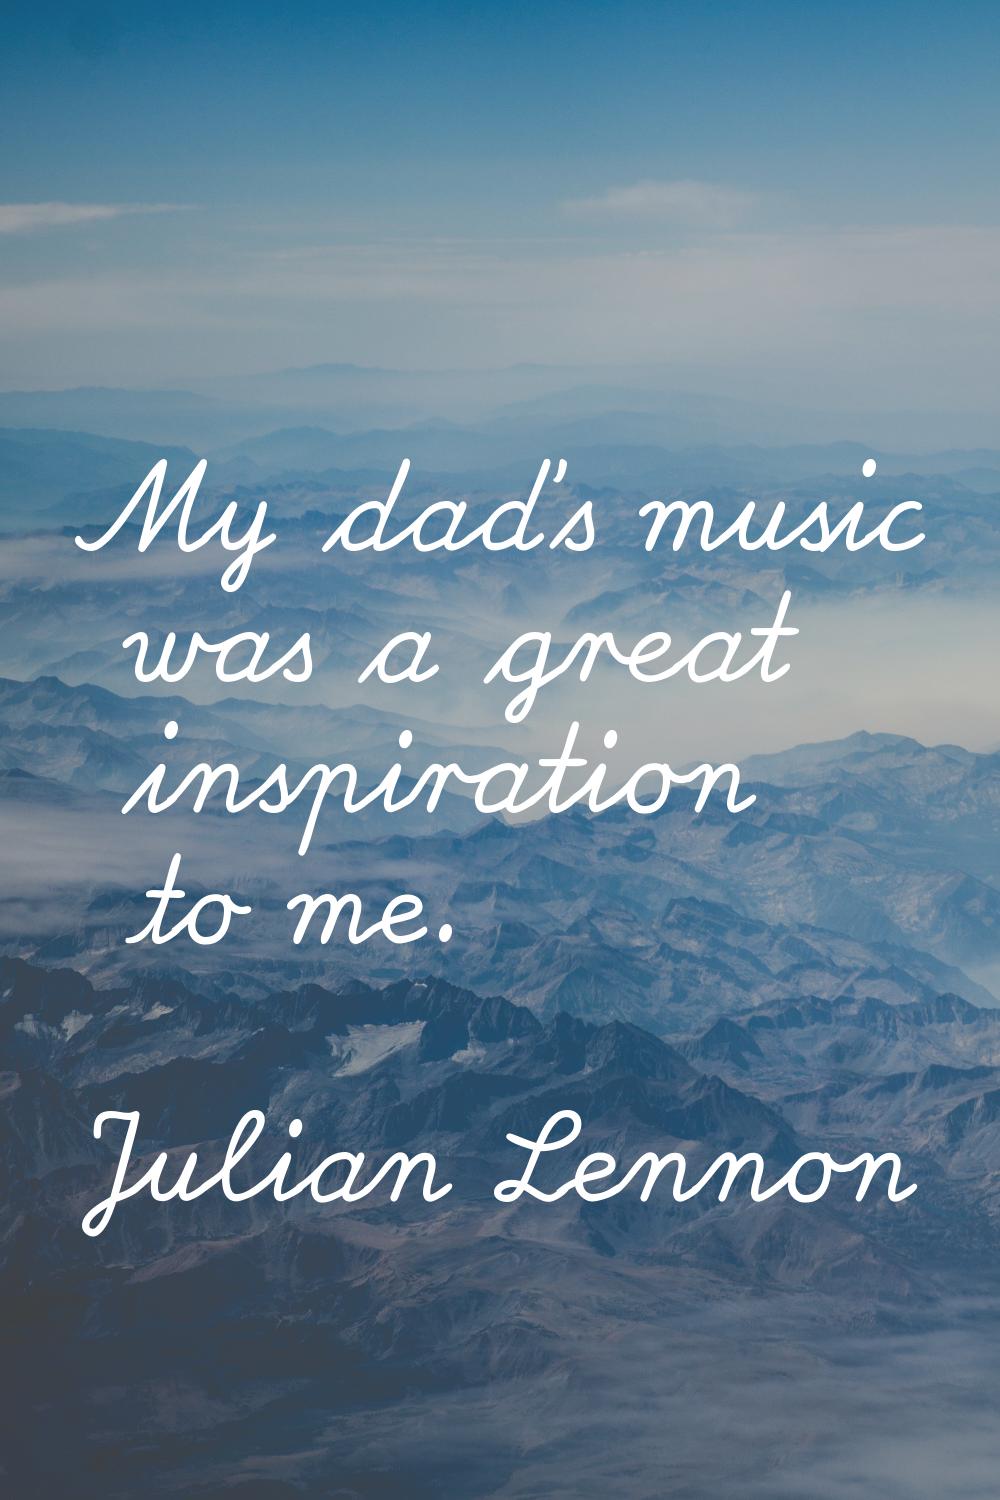 My dad's music was a great inspiration to me.